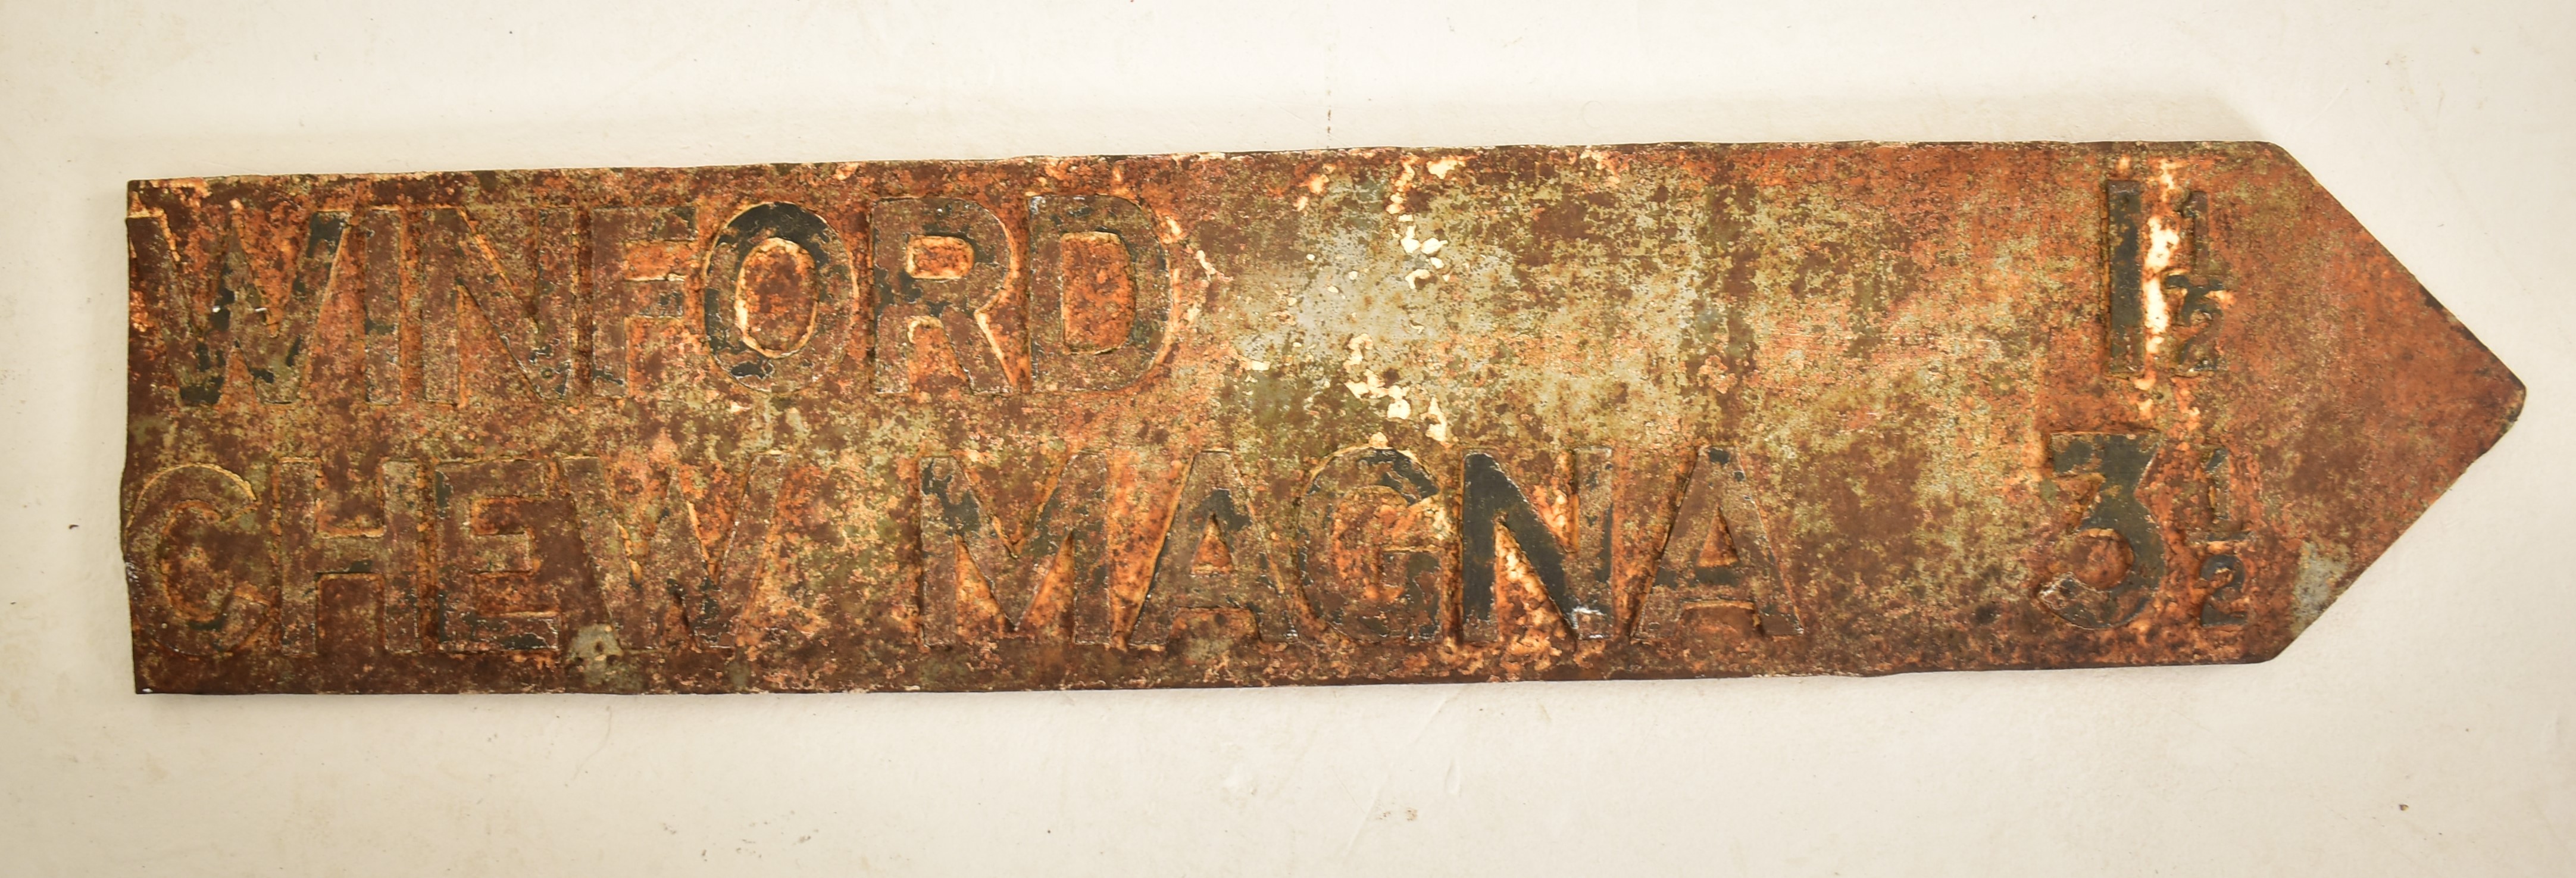 MID 20TH CENTURY CAST IRON DOUBLE SIDED ROAD SIGN - Image 3 of 3